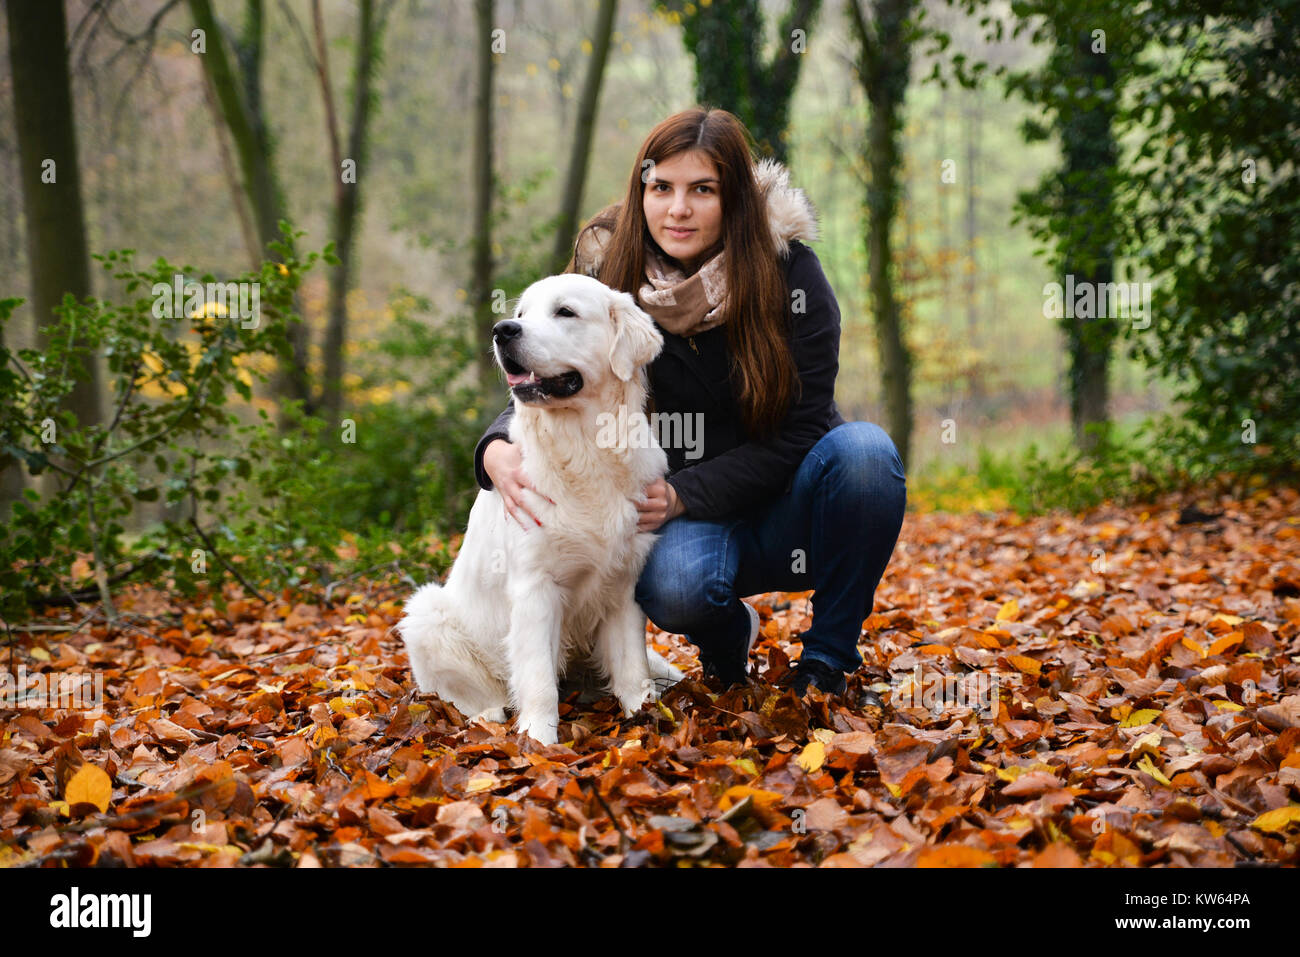 Golden Retriever dog and owner taking a photo outdoors in fall Stock Photo